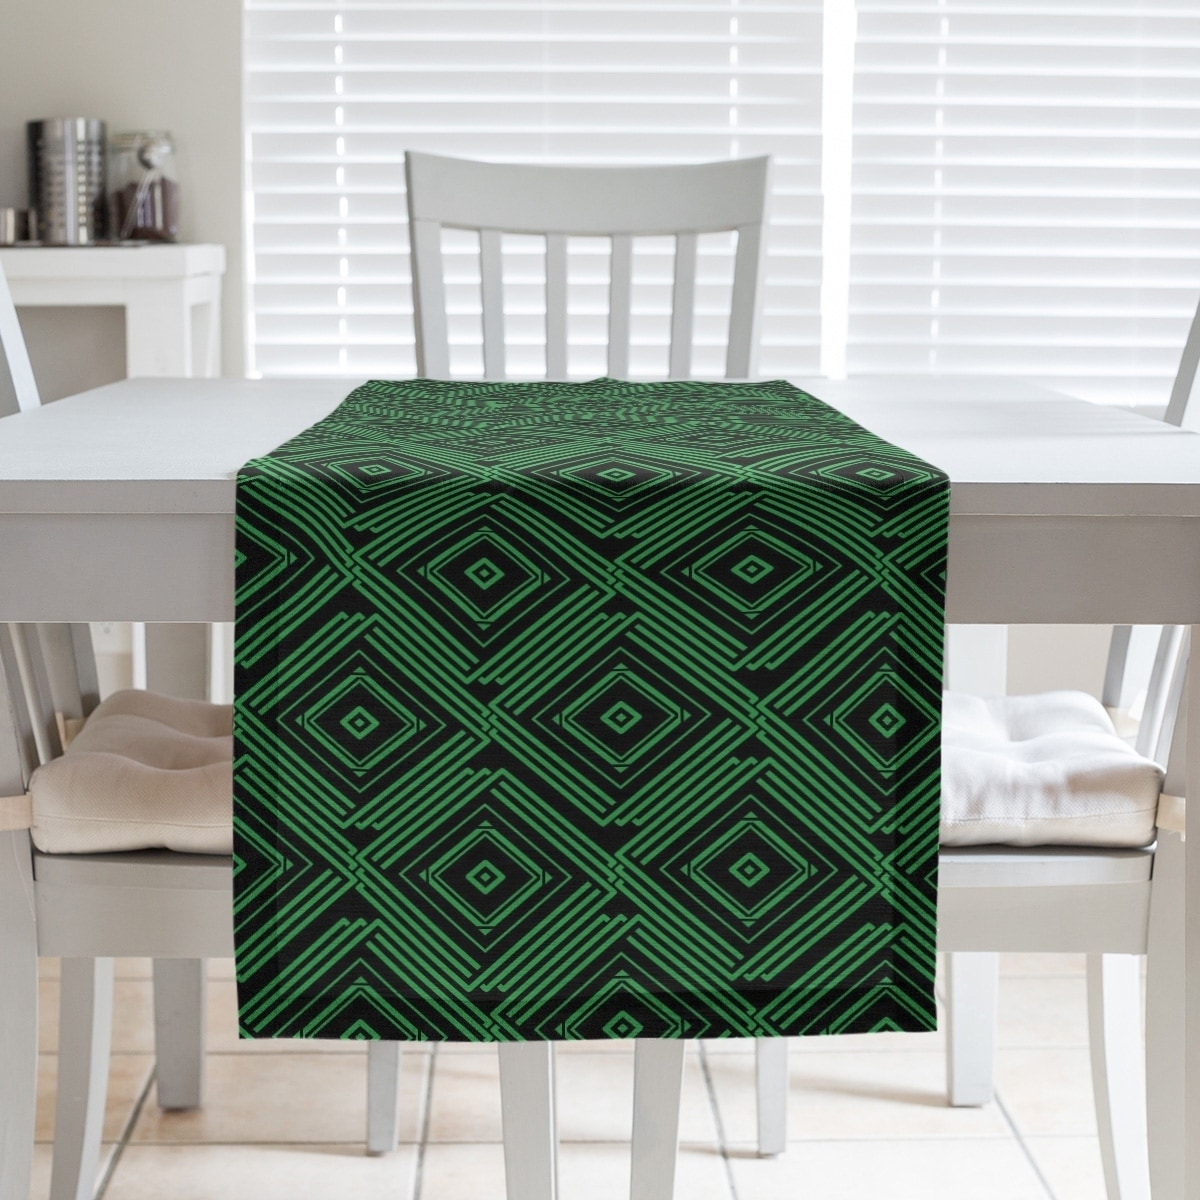 Shop Square Maze Table Runner On Sale Overstock 28528557